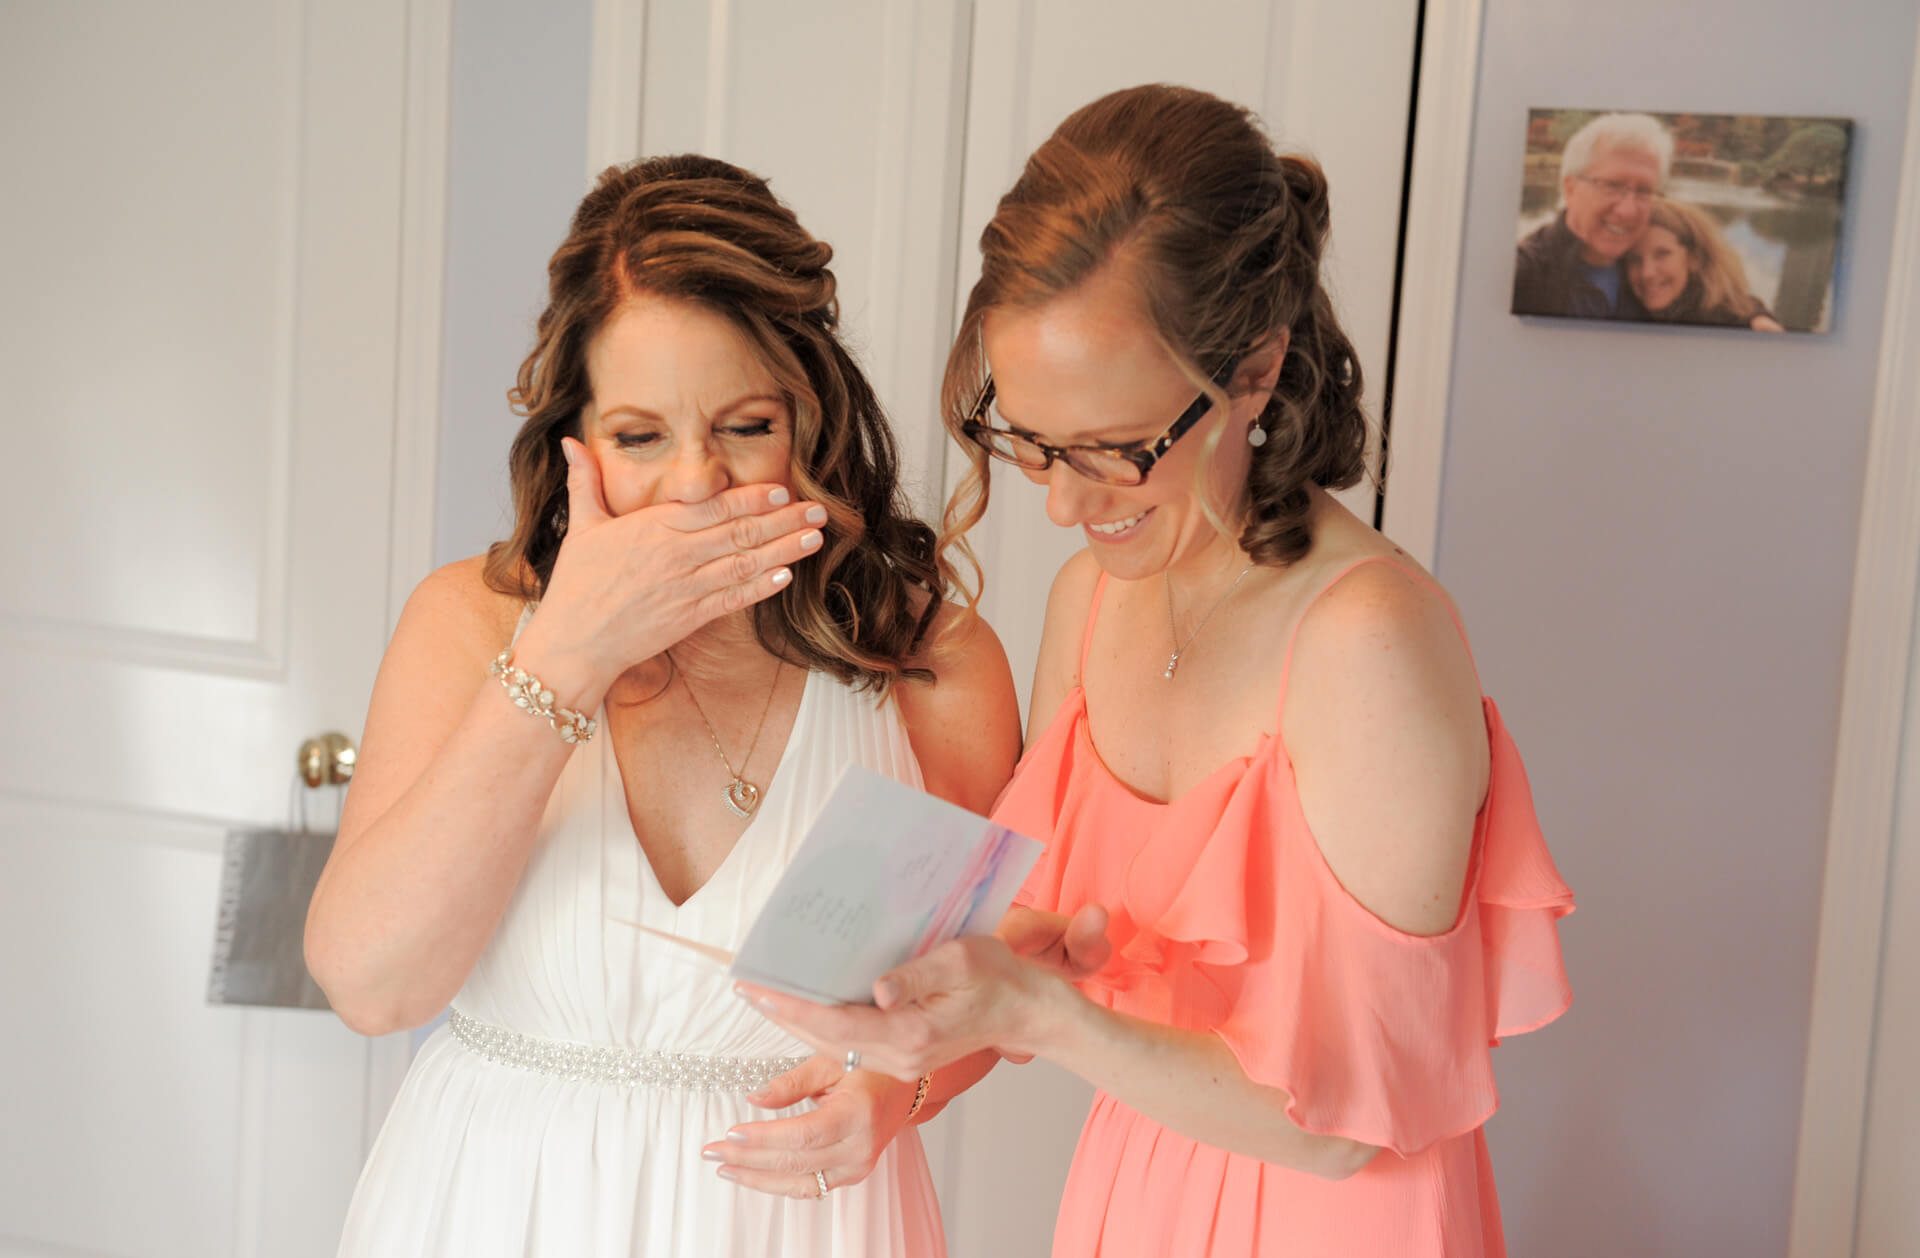 Documentary wedding photo of the bride and her new step daughter reading a note from her groom before heading off to their wedding in Detroit, Michigan.